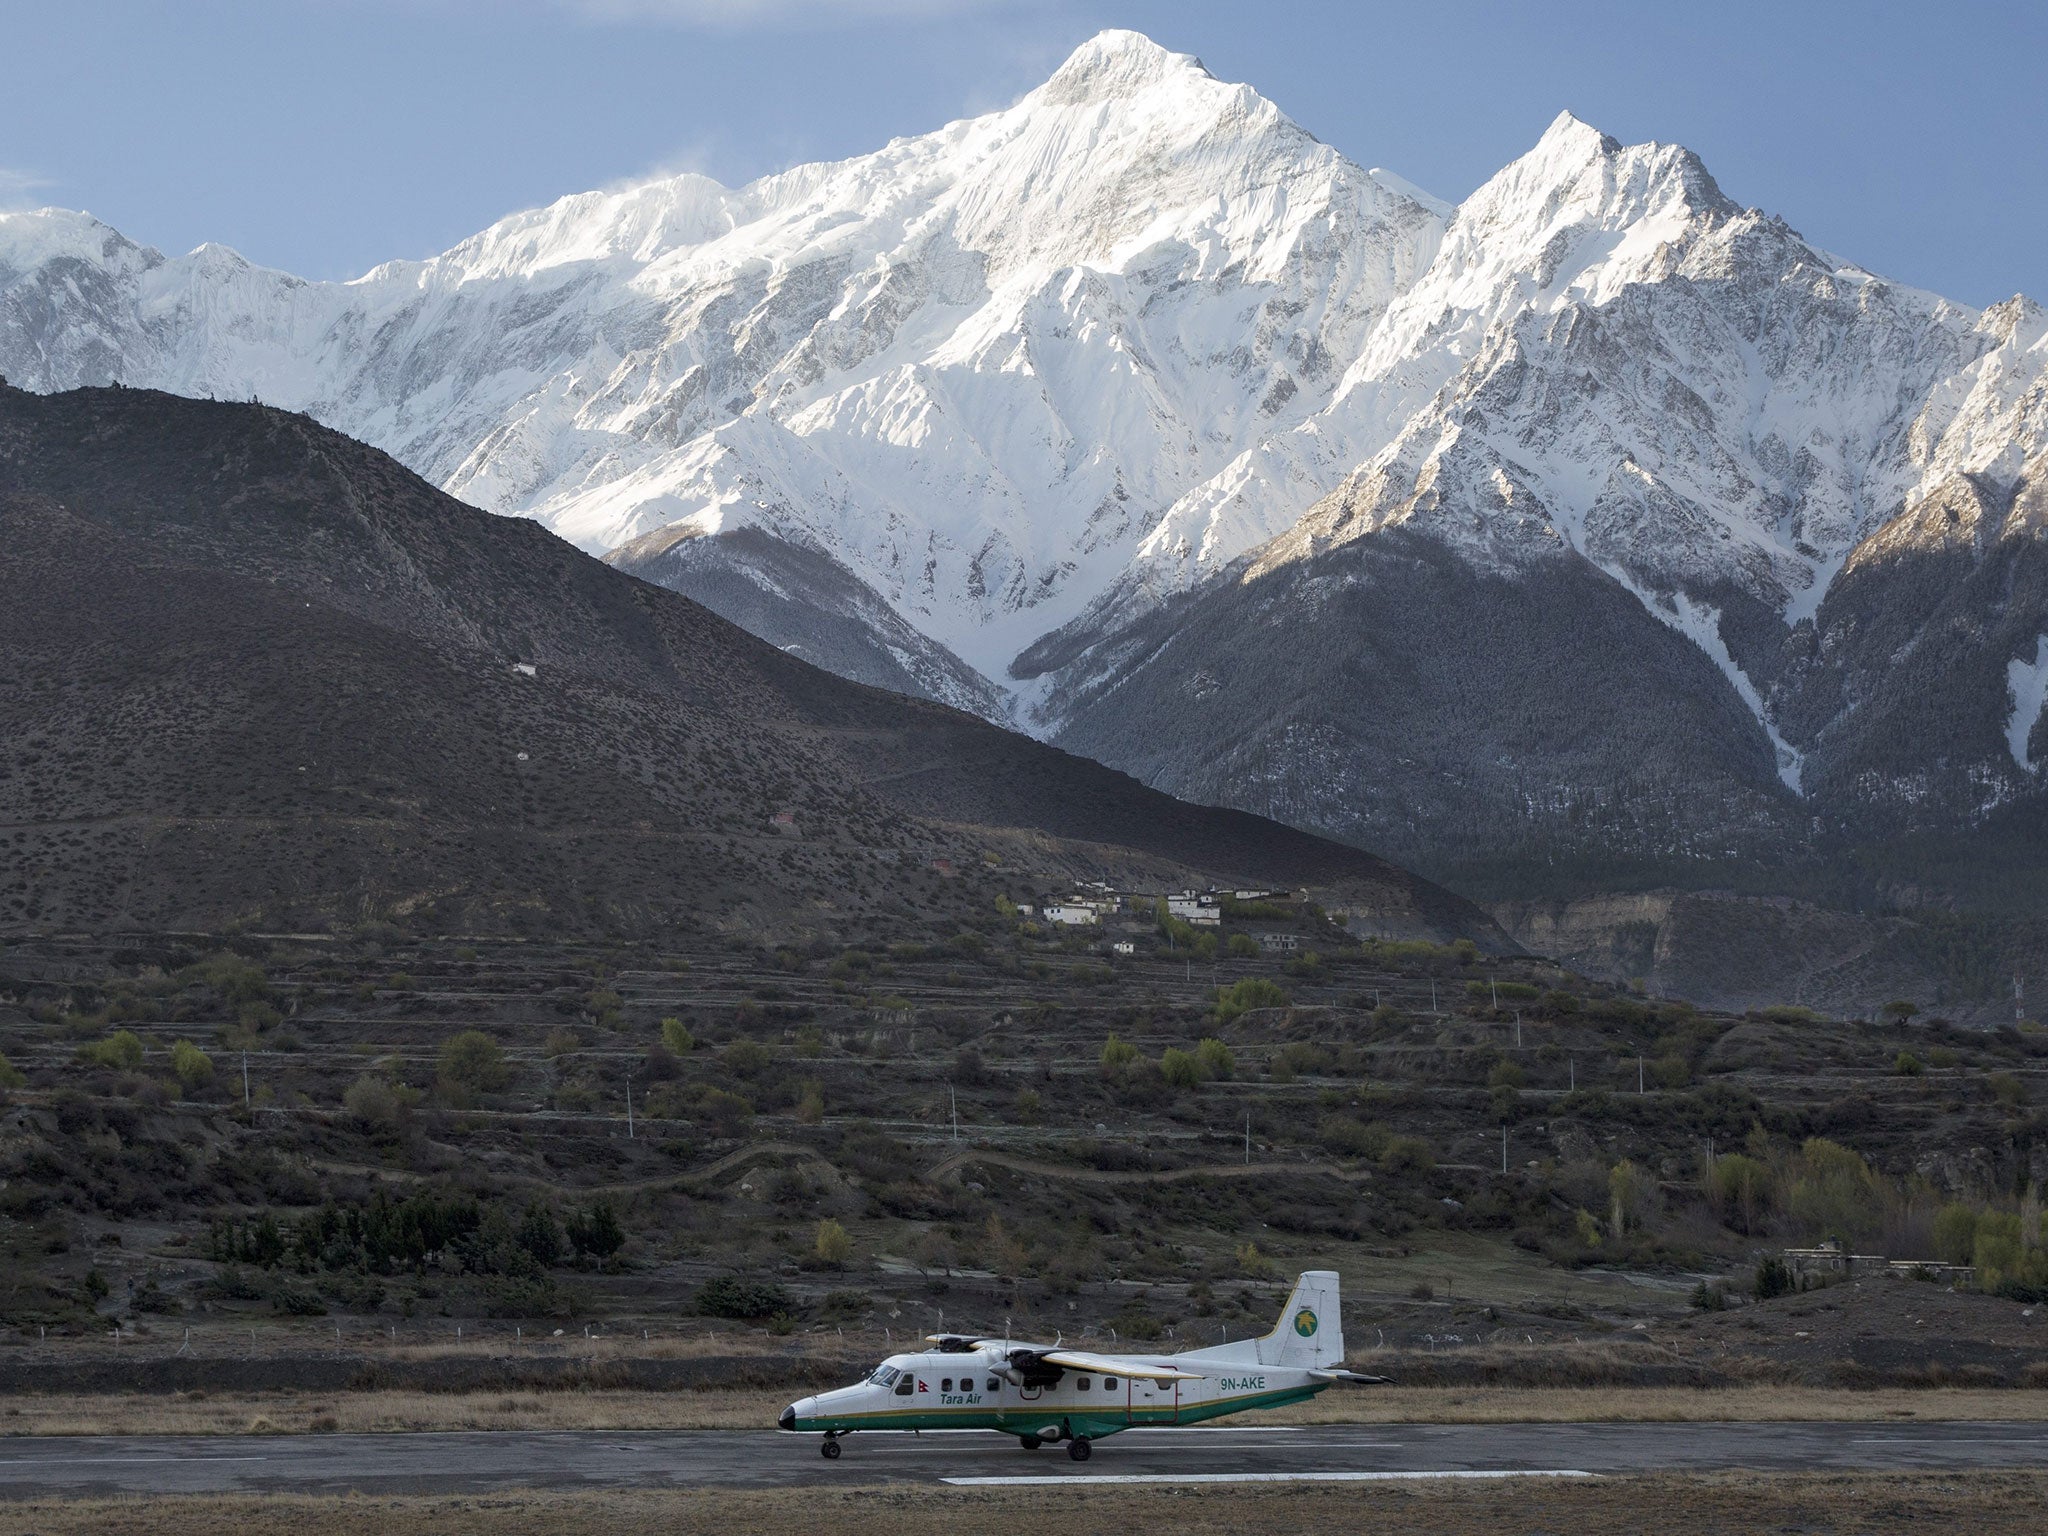 A picture made available on 24 February 2016 shows a twin aircraft of the Tara Airlines landing at Jomsom Airport, in Jomsom, a popular resort town west of Kathmandu, Nepal